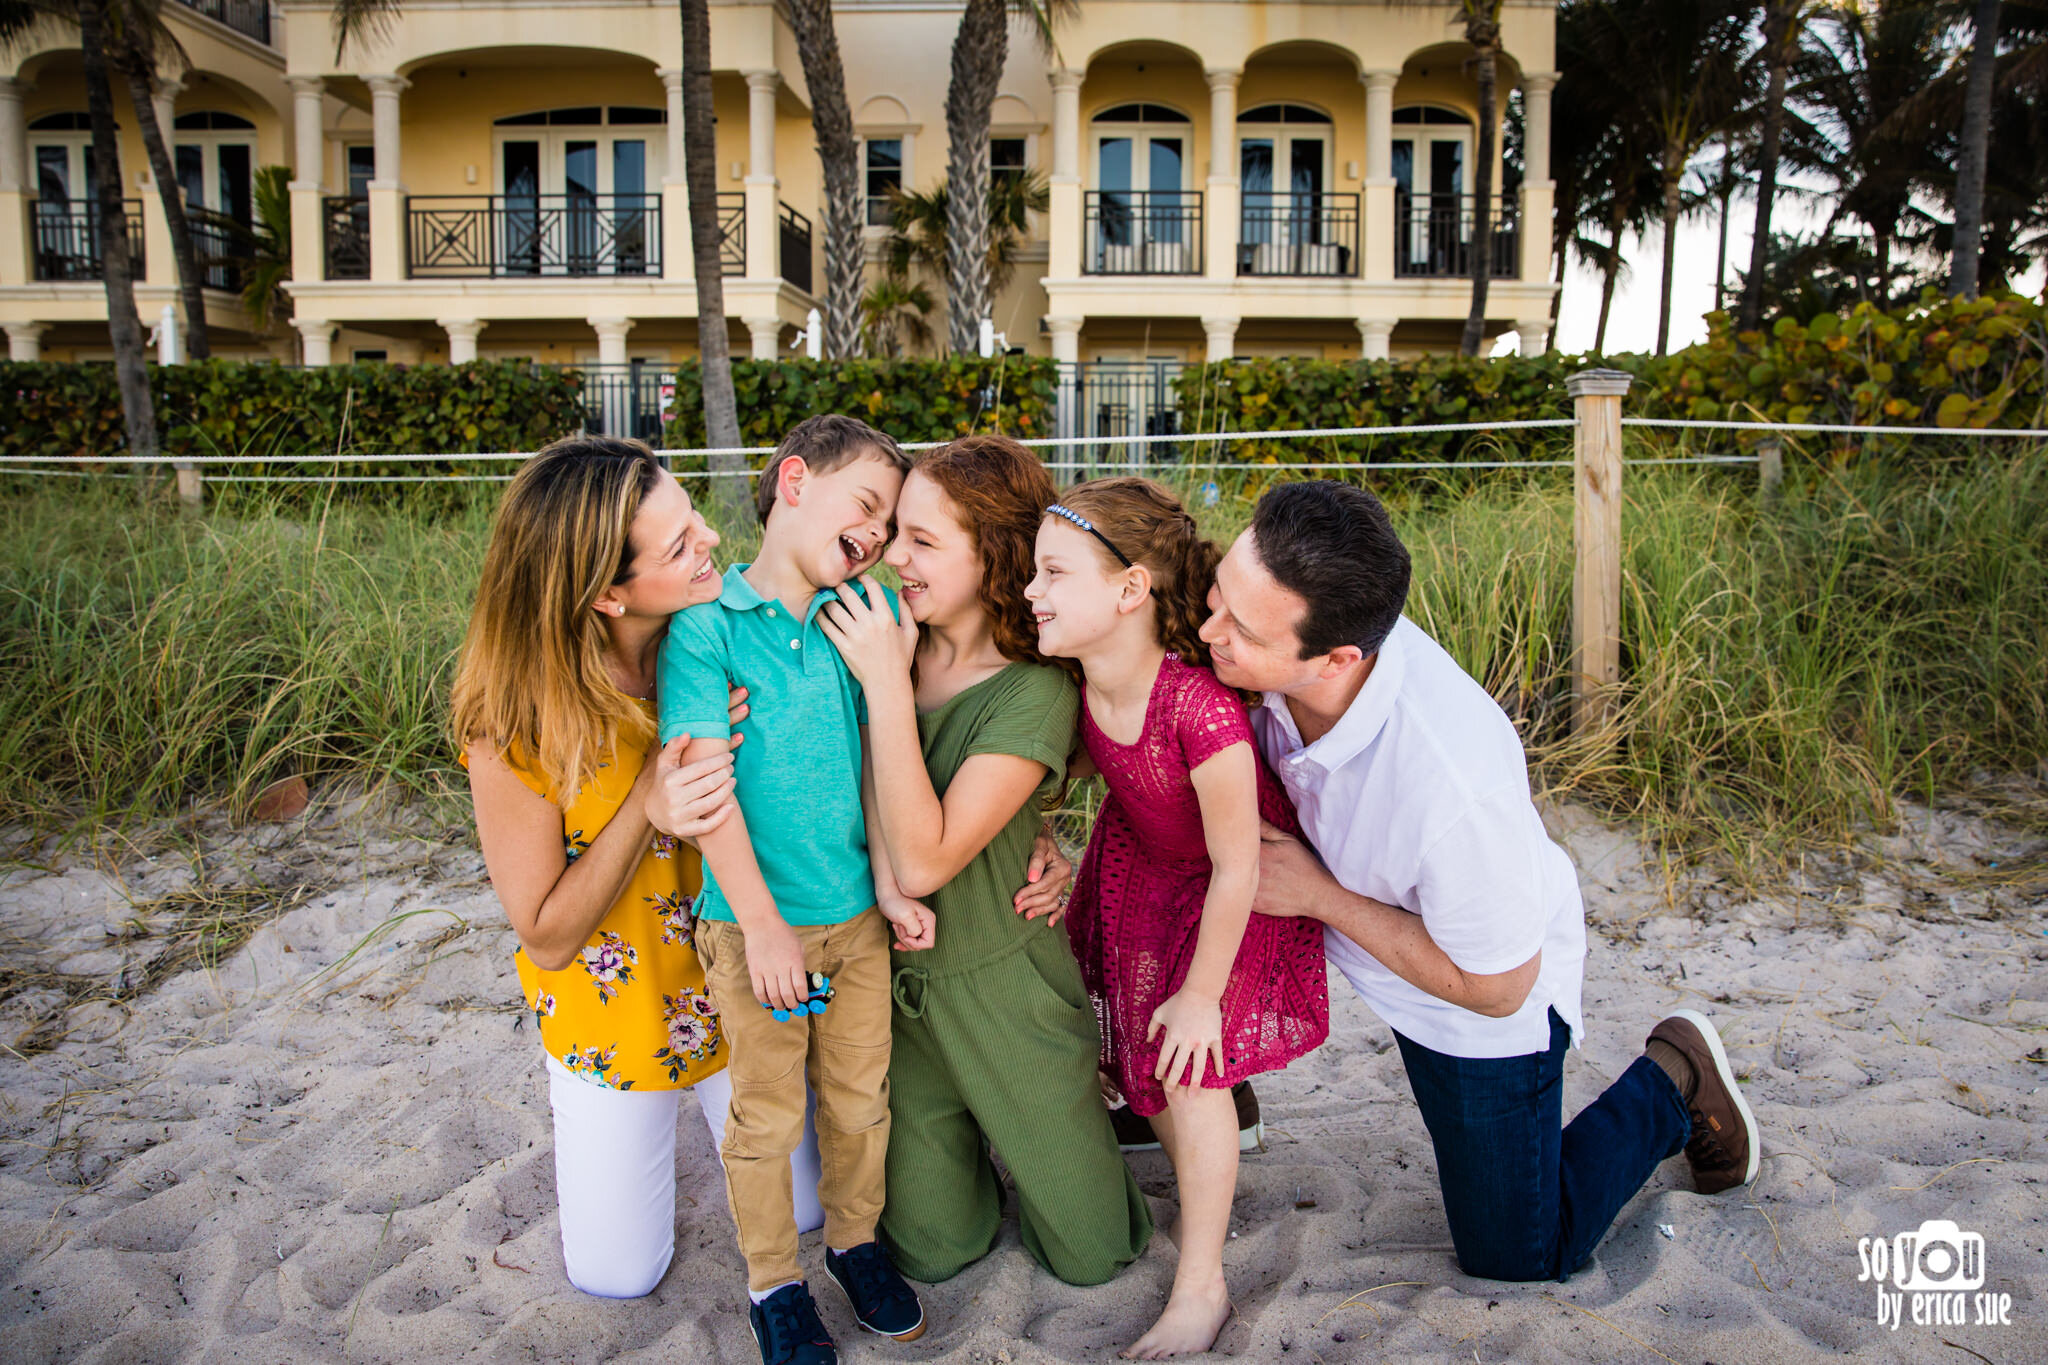 3-so-you-by-erica-sue-lifestyle-family-photographer-lauderdale-by-the-sea-sloan-5865.JPG